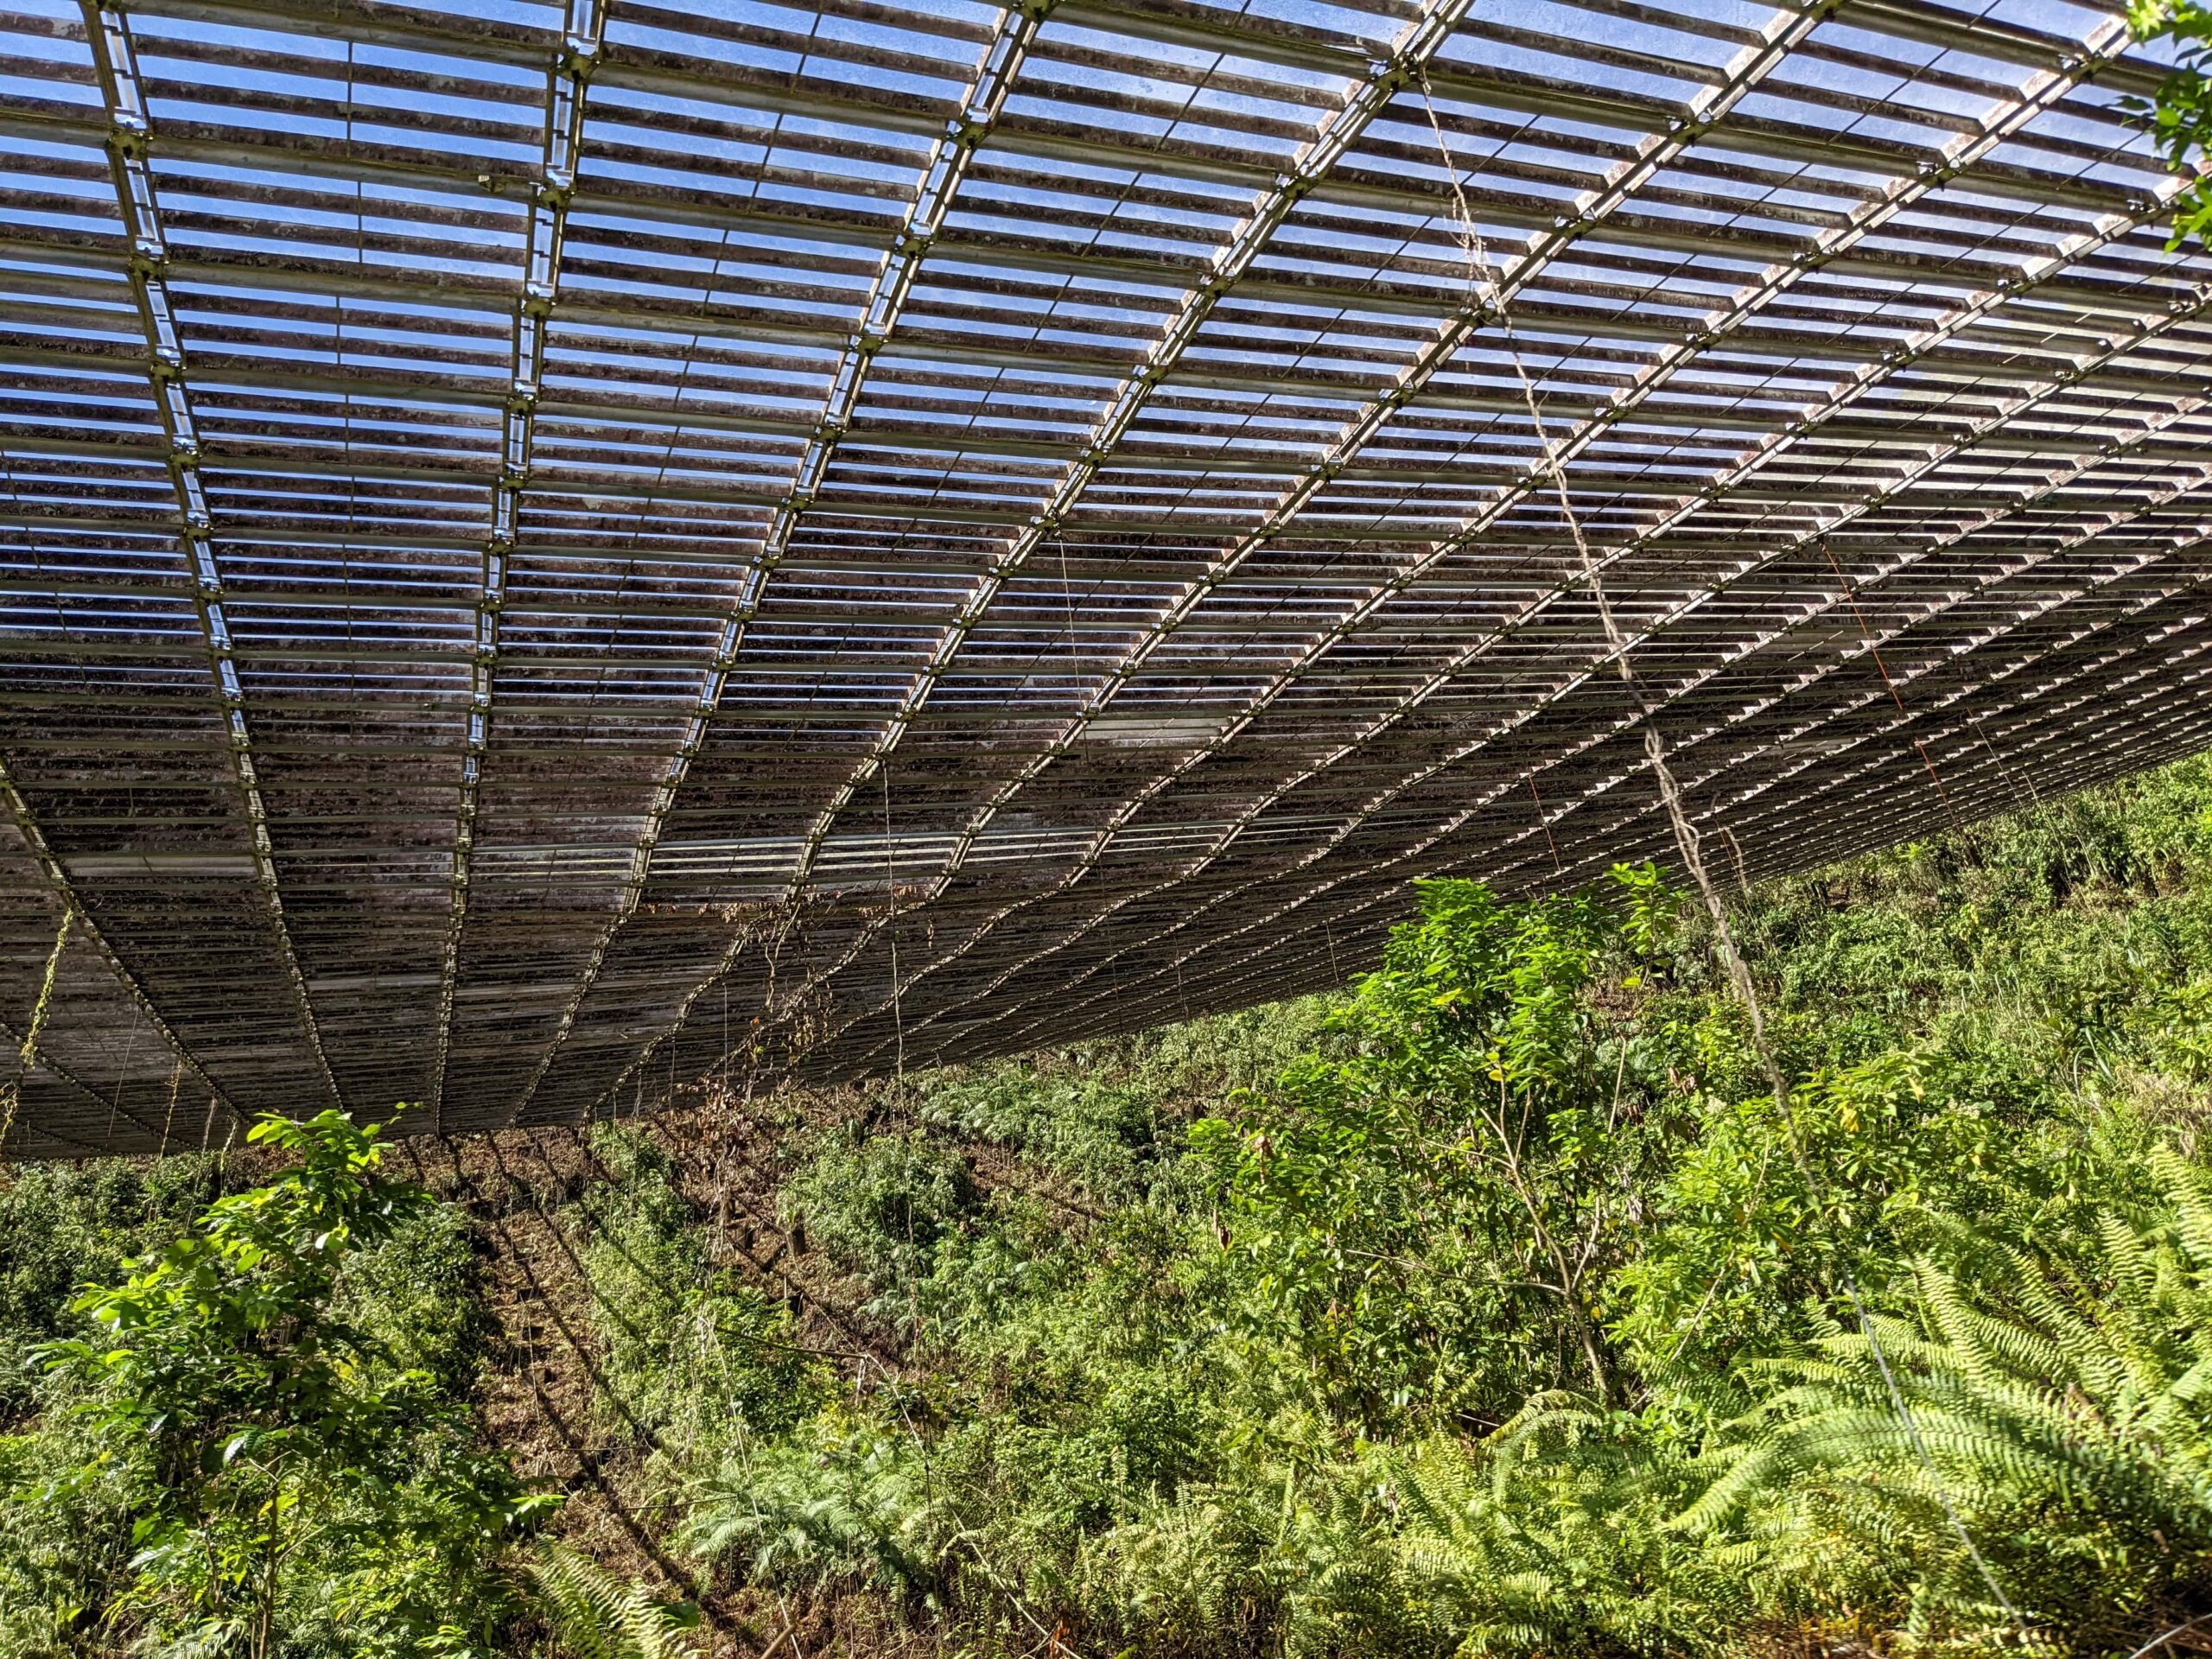 A view of the Arecibo Telescope's dish from underneath. Light shines through the perforated aluminum panels, and dense foliage grows underneath